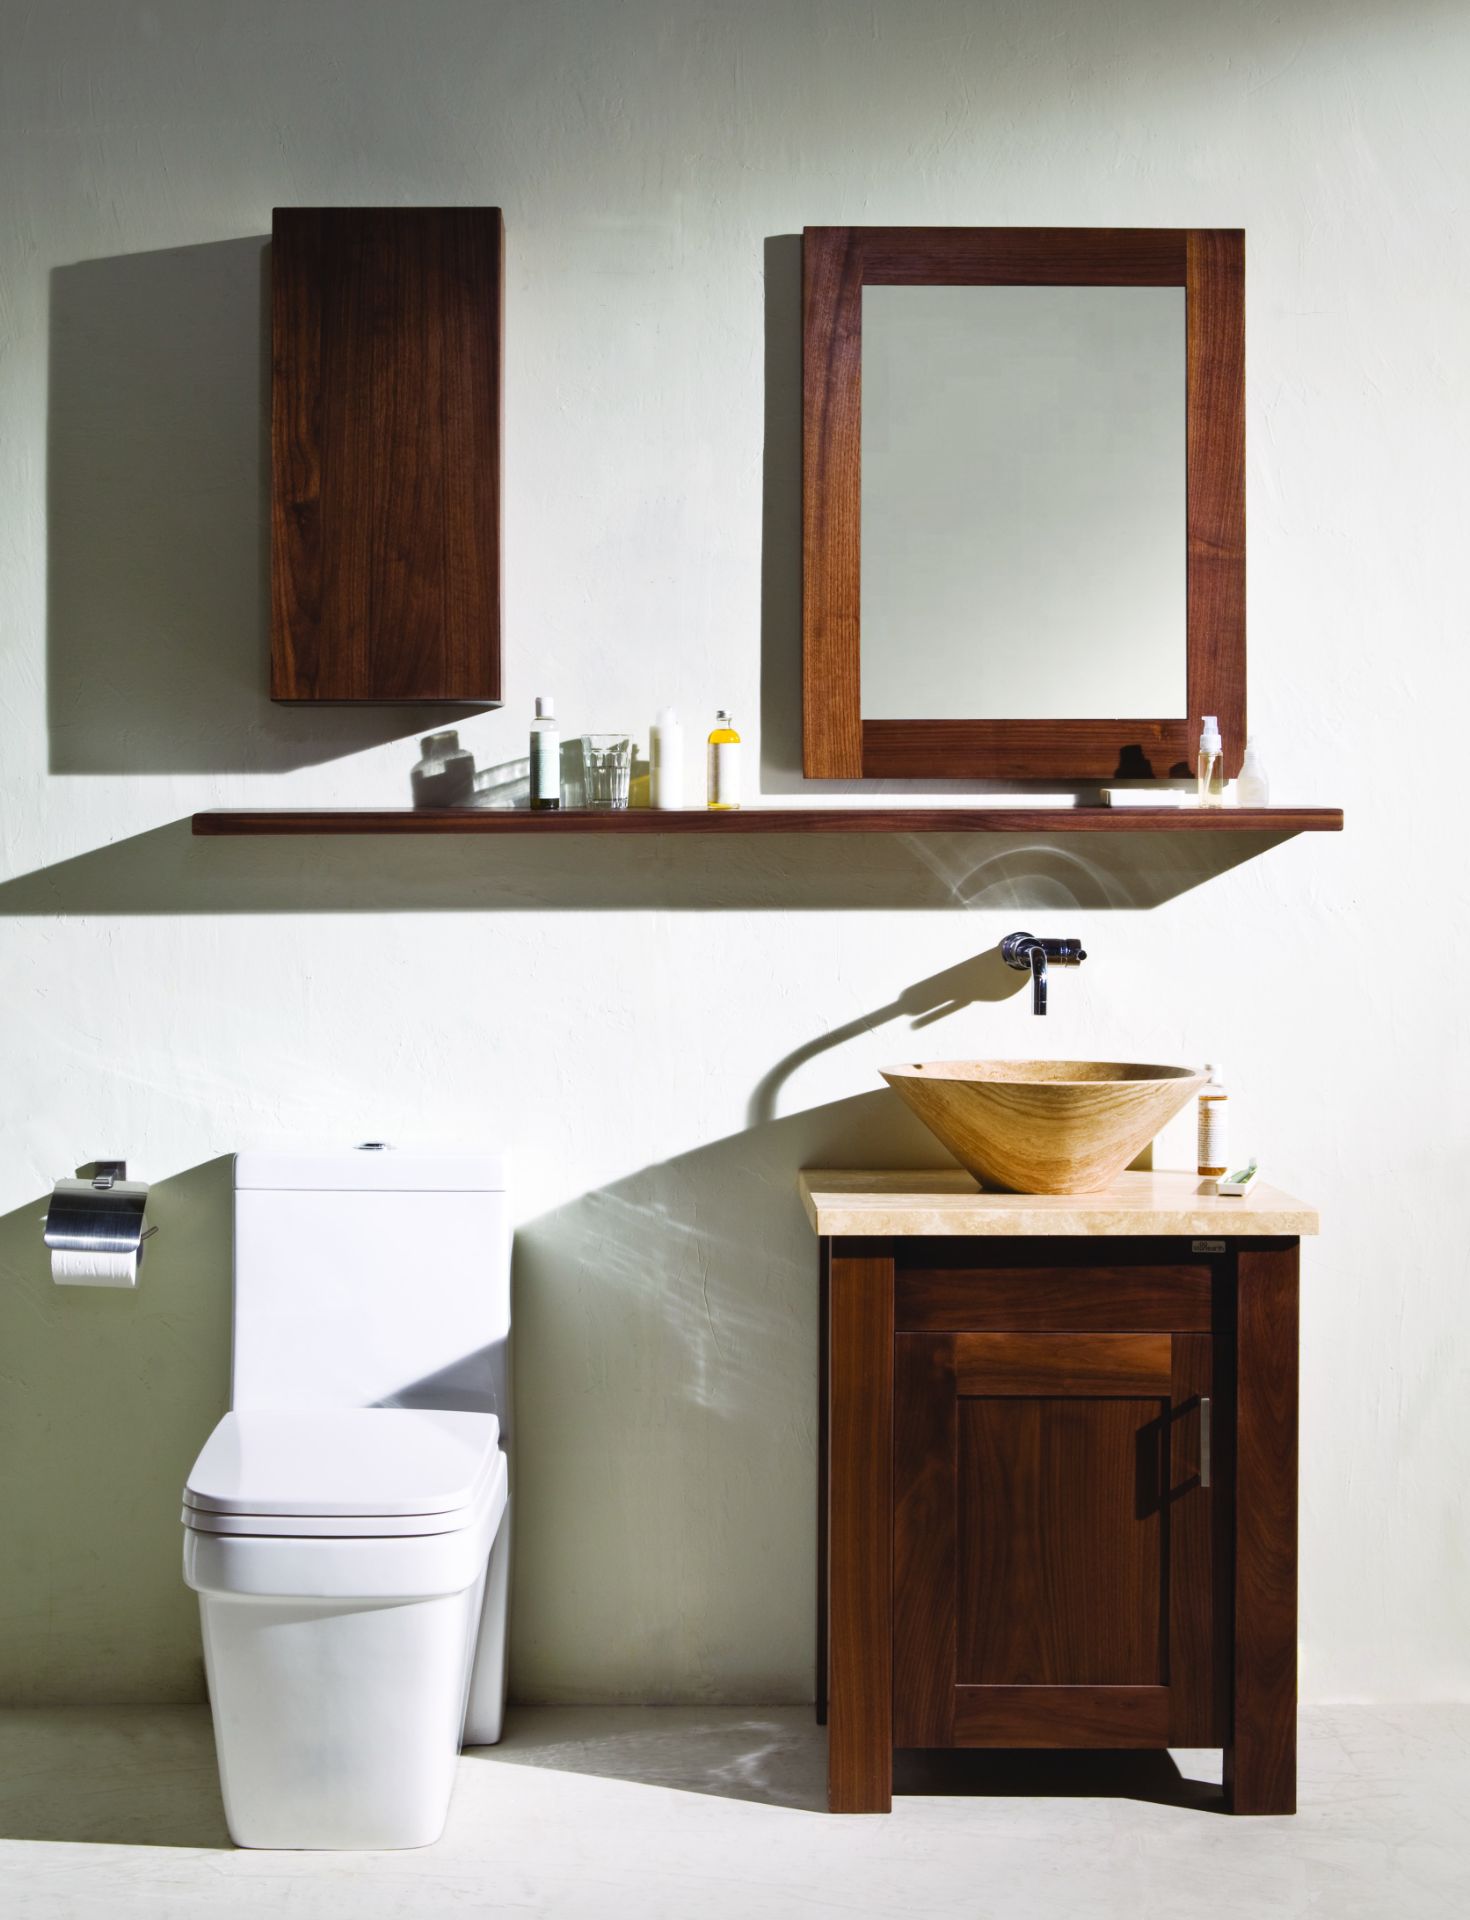 1 x Stonearth Bathroom Storage Shelf With Concealed Brackets - American Solid Walnut - Size: 1200mm - Image 6 of 16